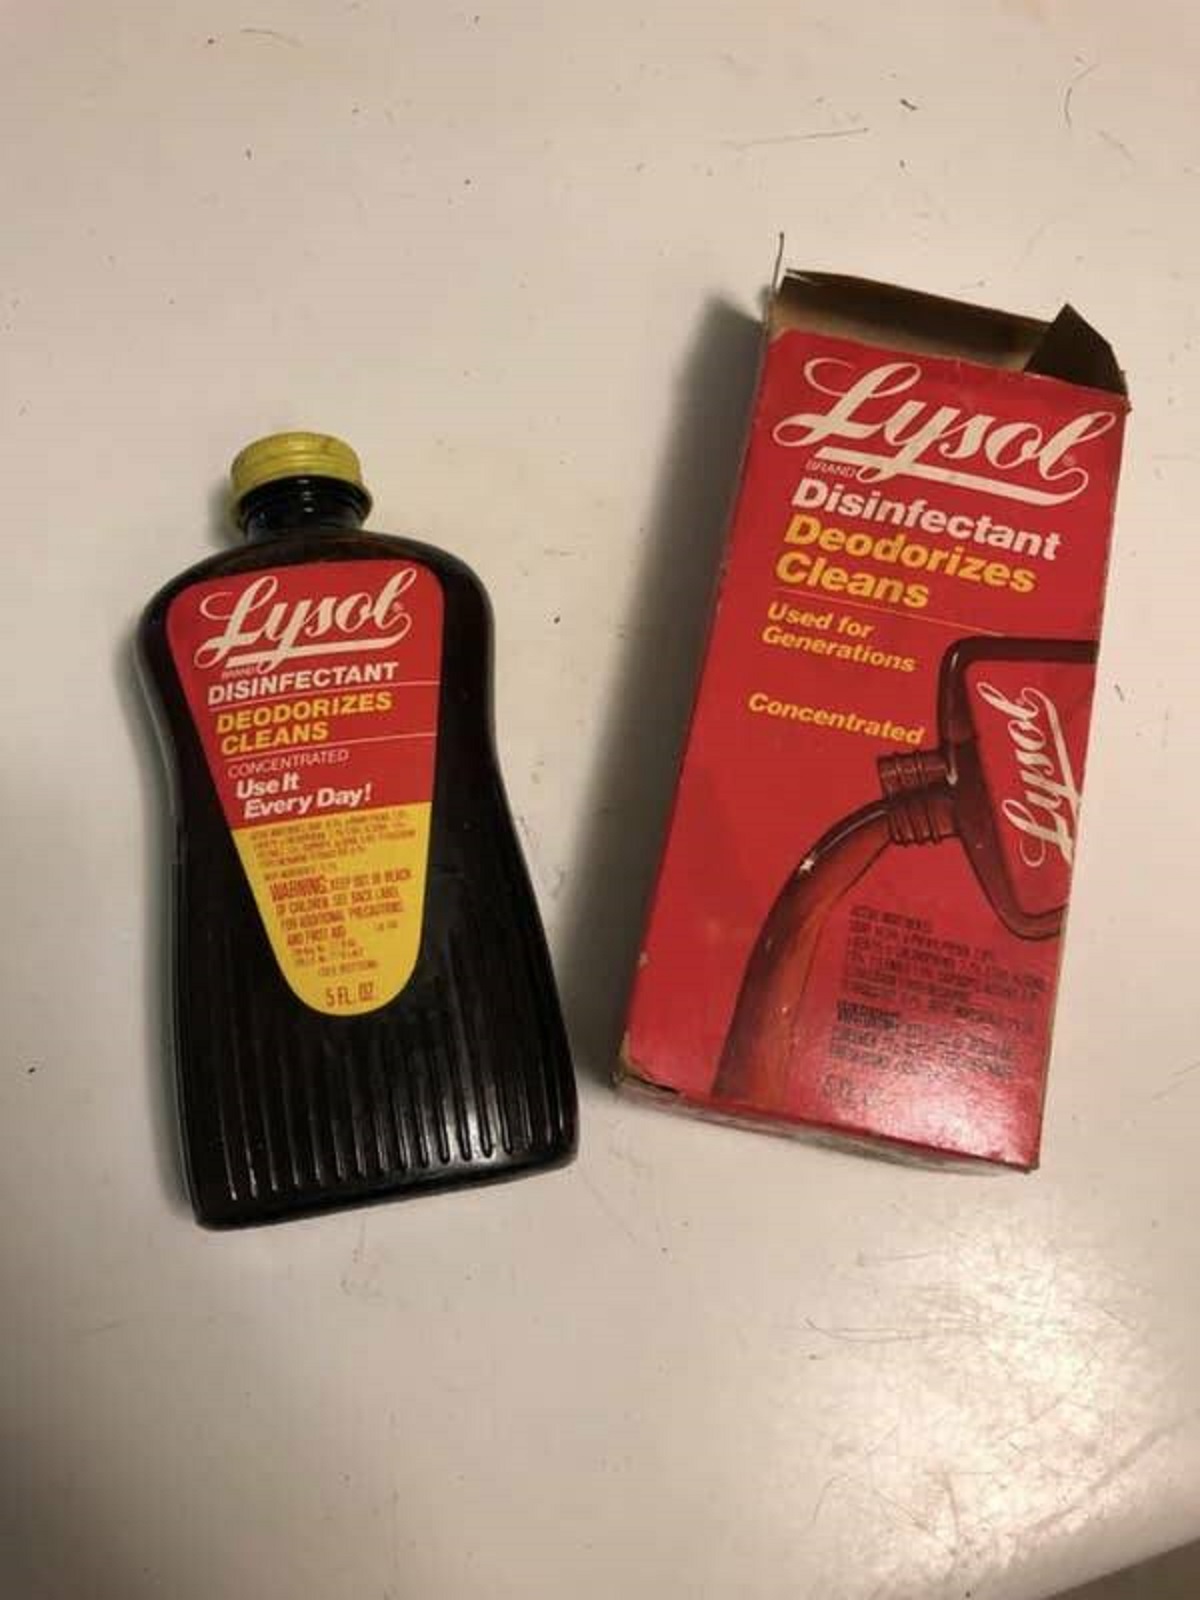 Here's what Lysol used to look like.